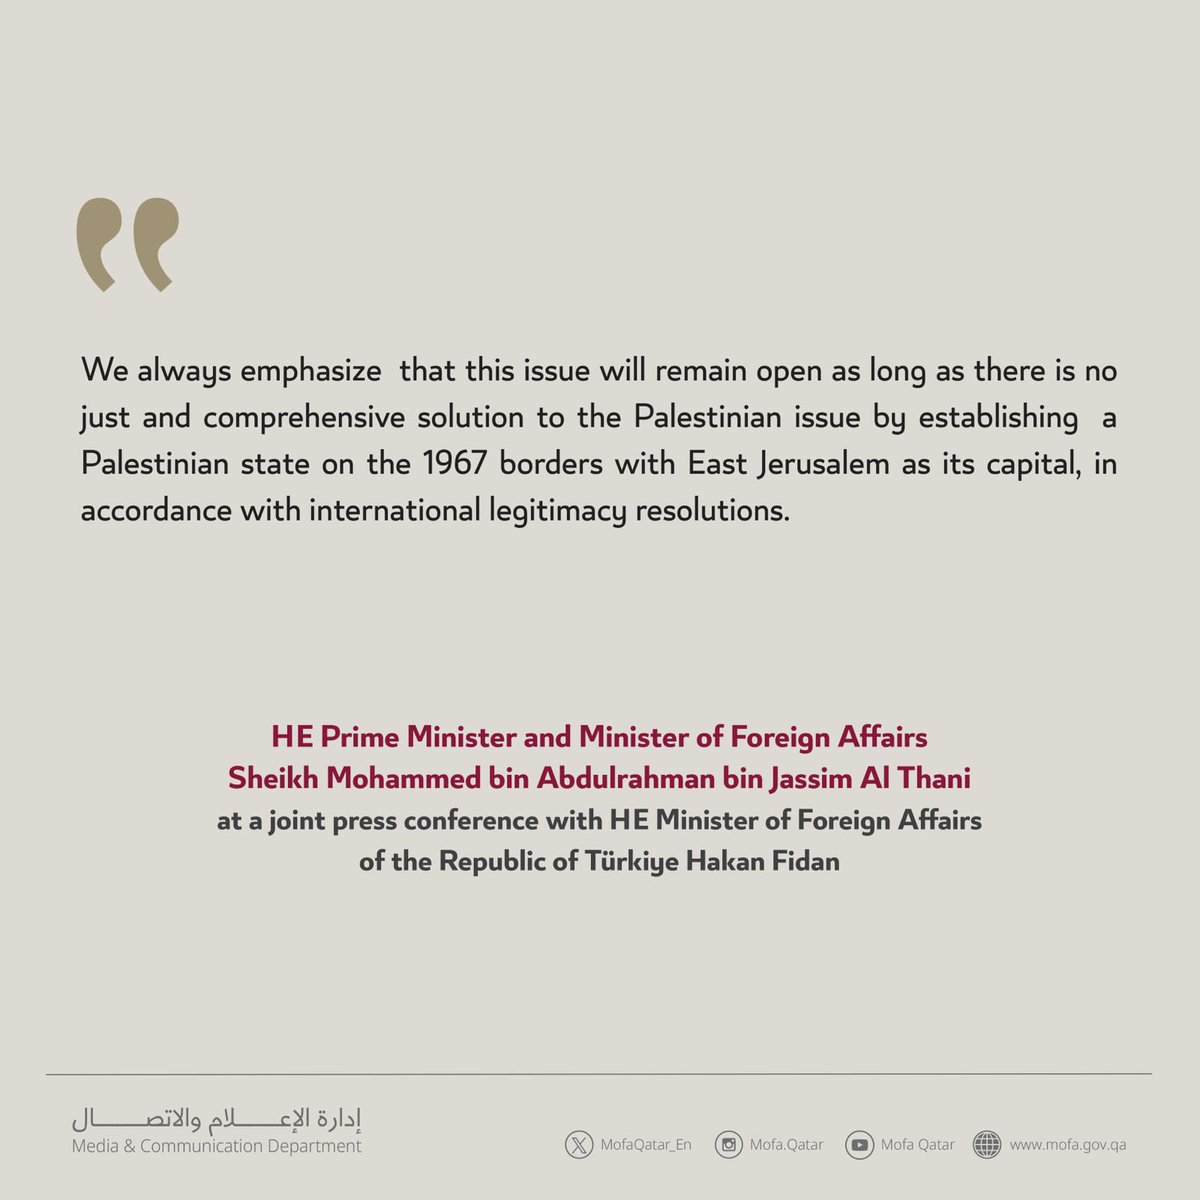 HE Prime Minister and Minister of Foreign Affairs Sheikh Mohammed bin Abdulrahman bin Jassim Al Thani at a joint press conference with HE Minister of Foreign Affairs of the Republic of Türkiye Hakan Fidan. #MOFAQatar